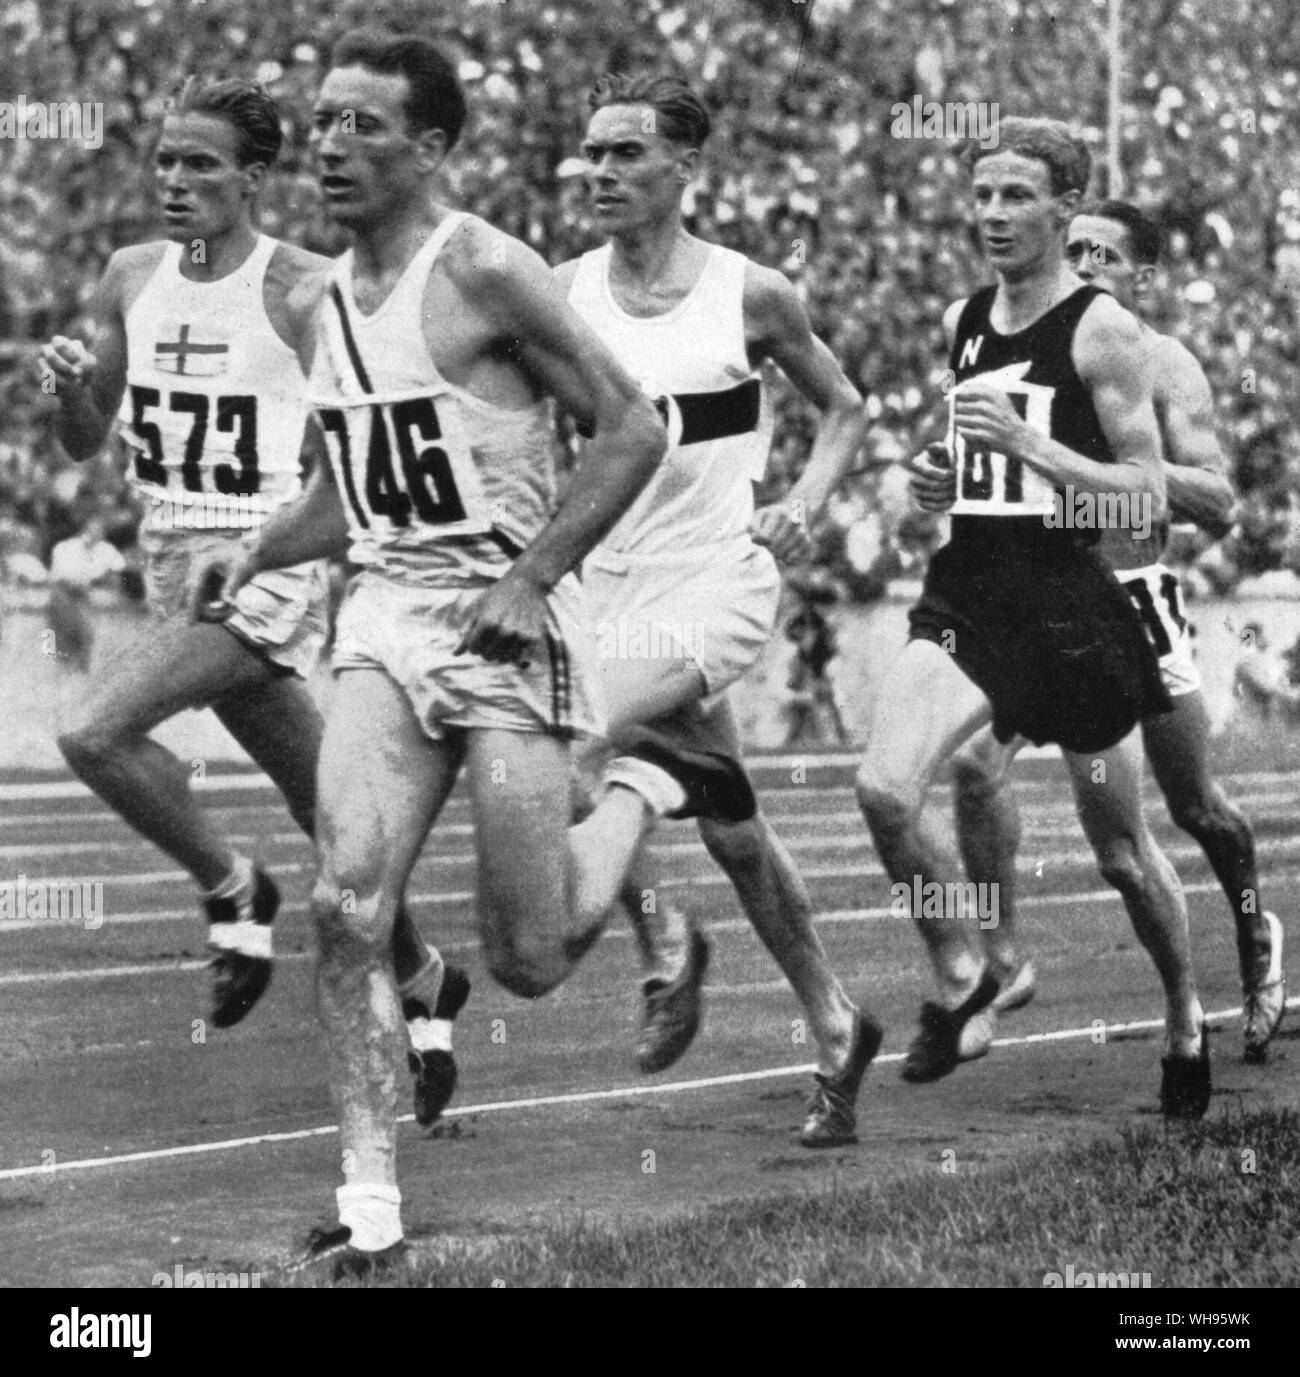 1500 metre final following the first lap Cunningham is leading while Ny and Schaumburg fight for second place Lovelock follows Olympic Games Berlin 1936 Stock Photo